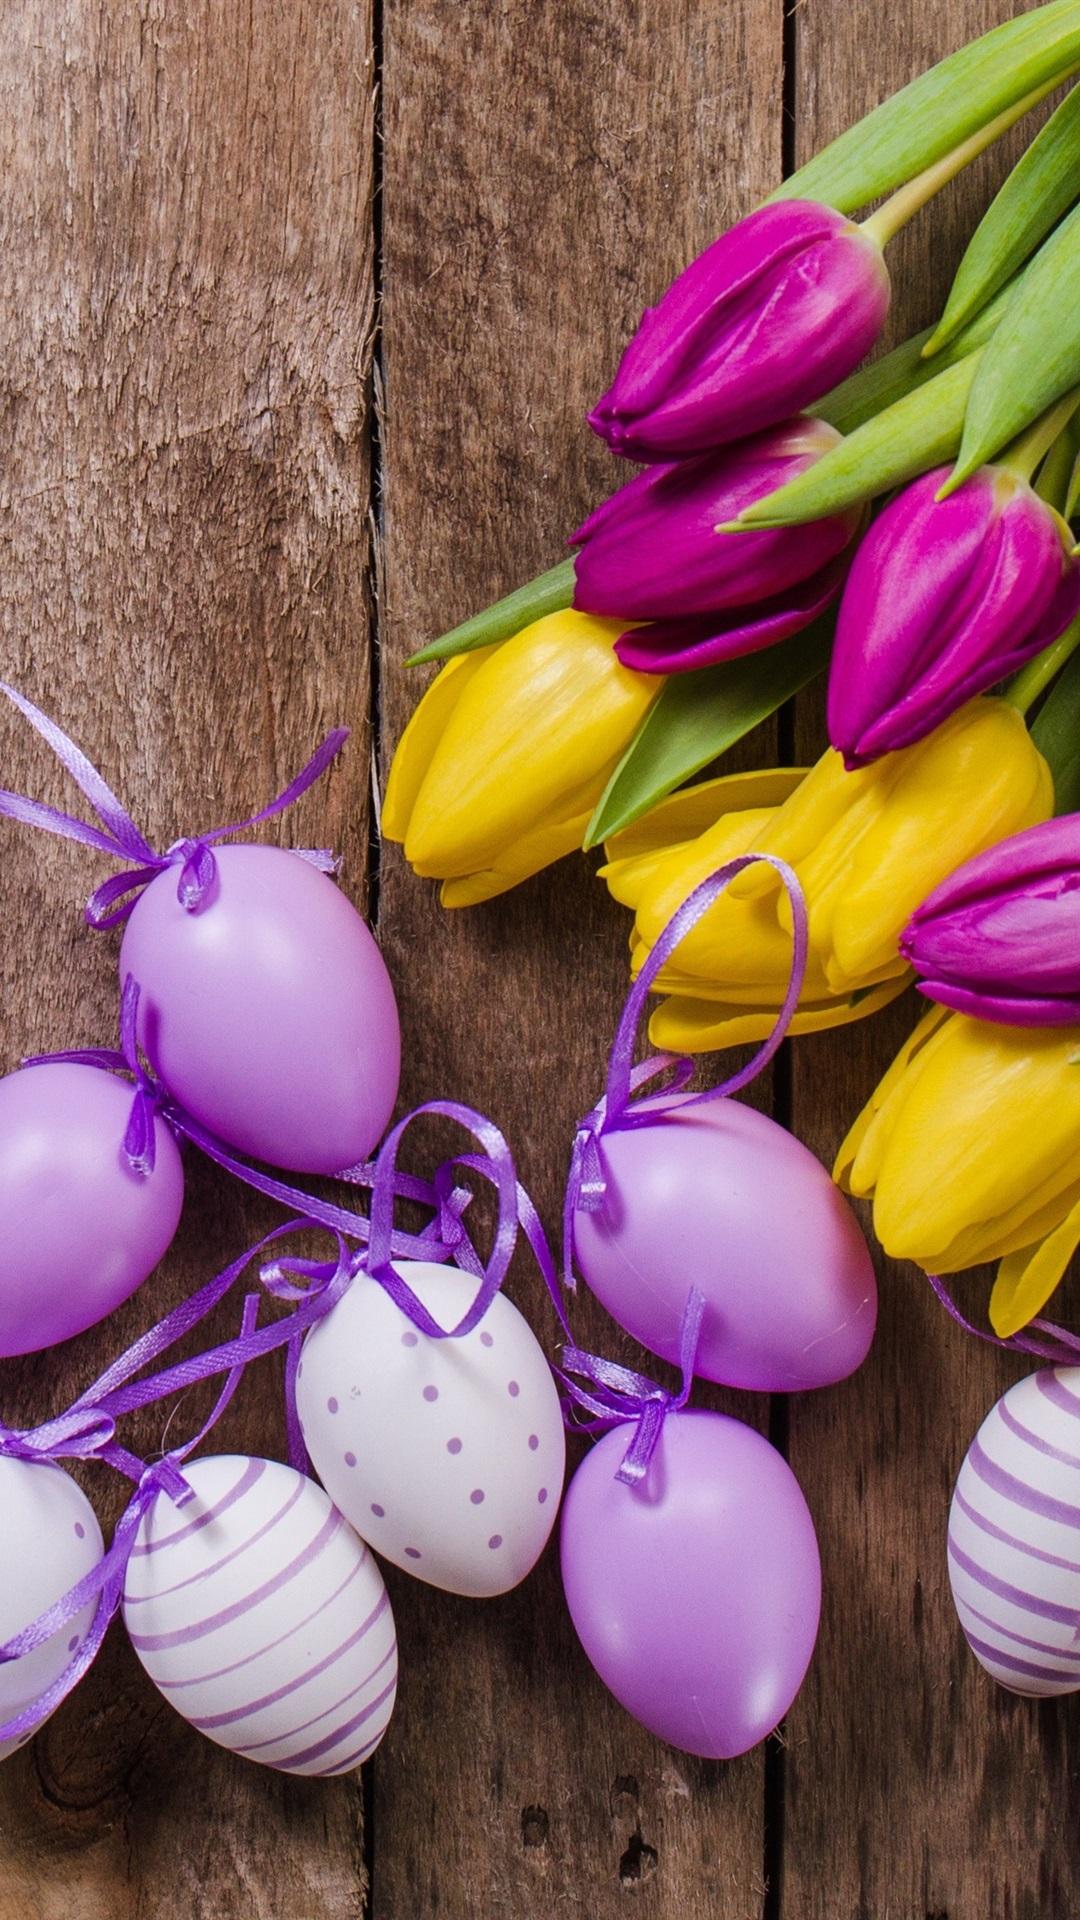 Yellow And Purple Tulips, Eggs, Easter 1080x1920 IPhone 8 7 6 6S